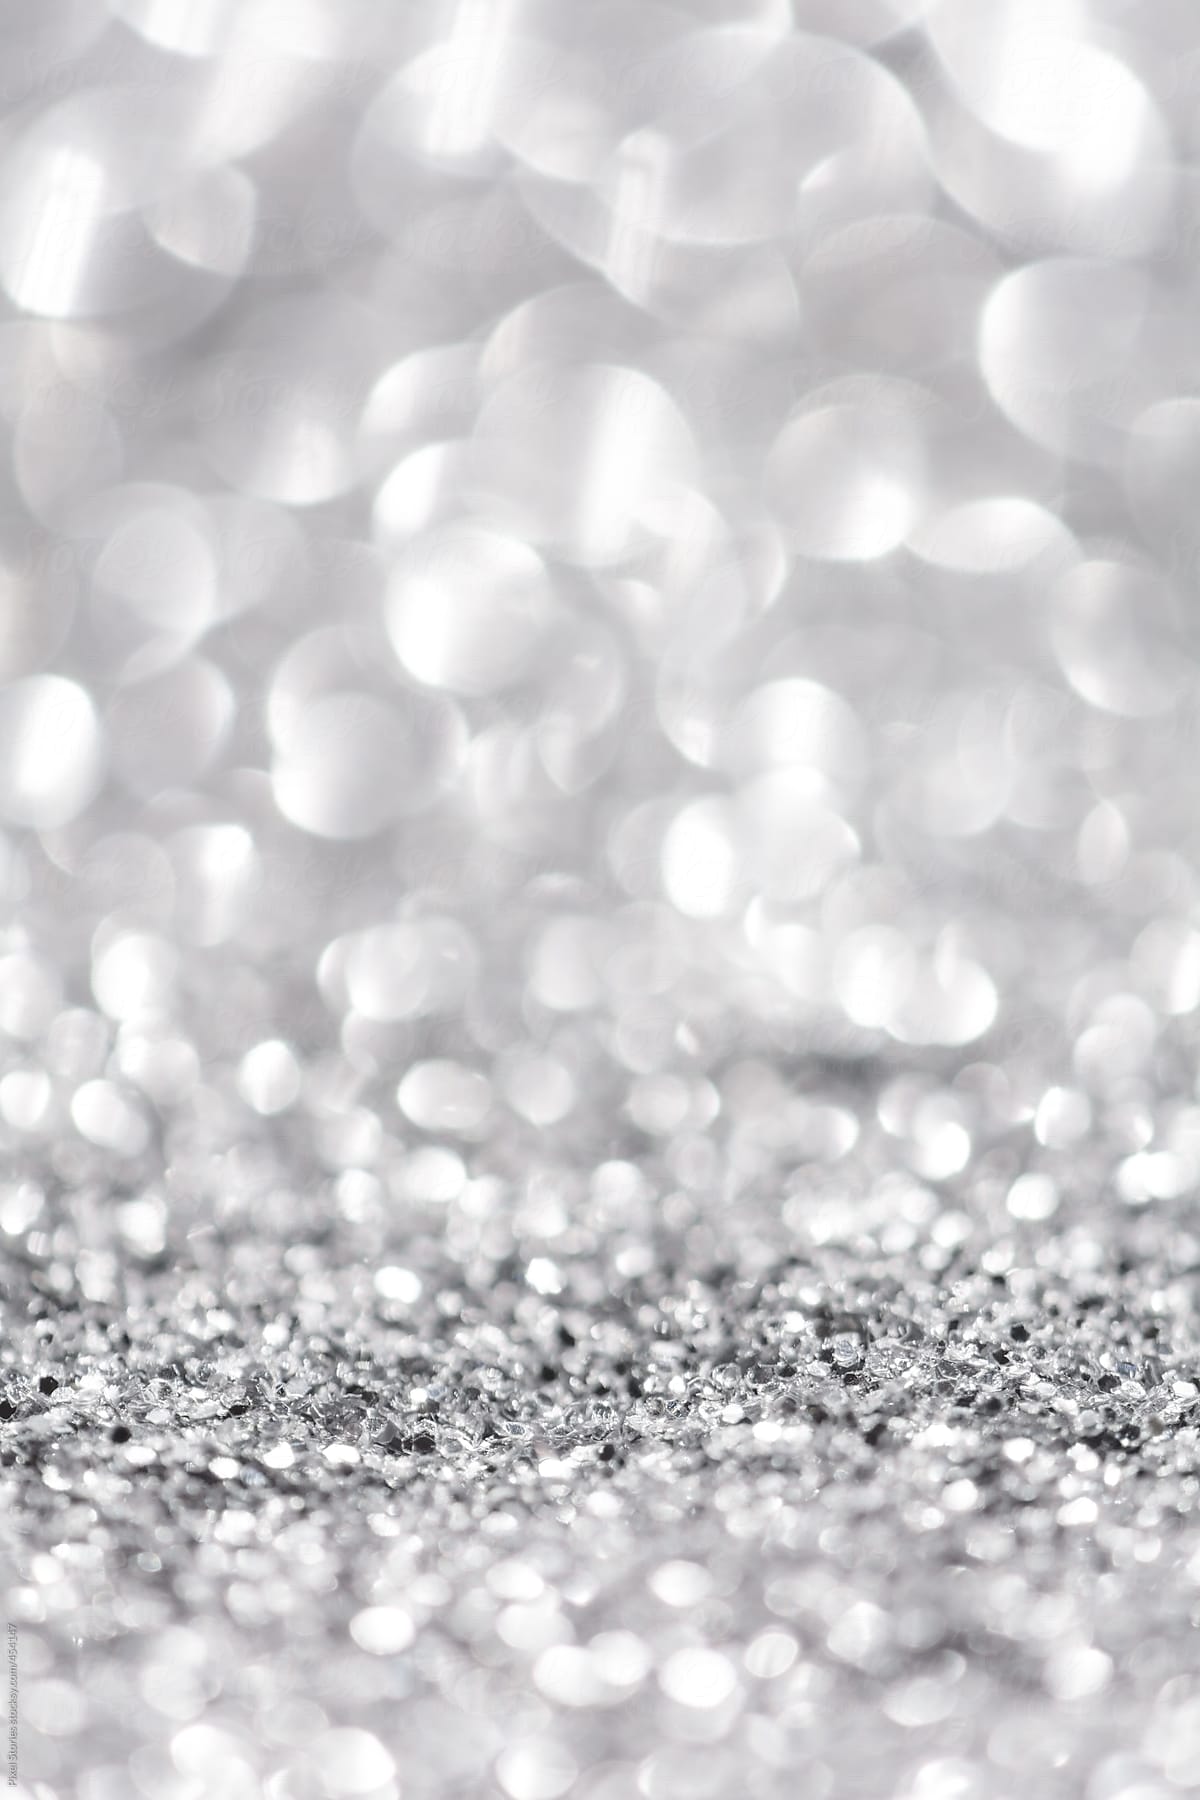 White glitter with shallow depth of field